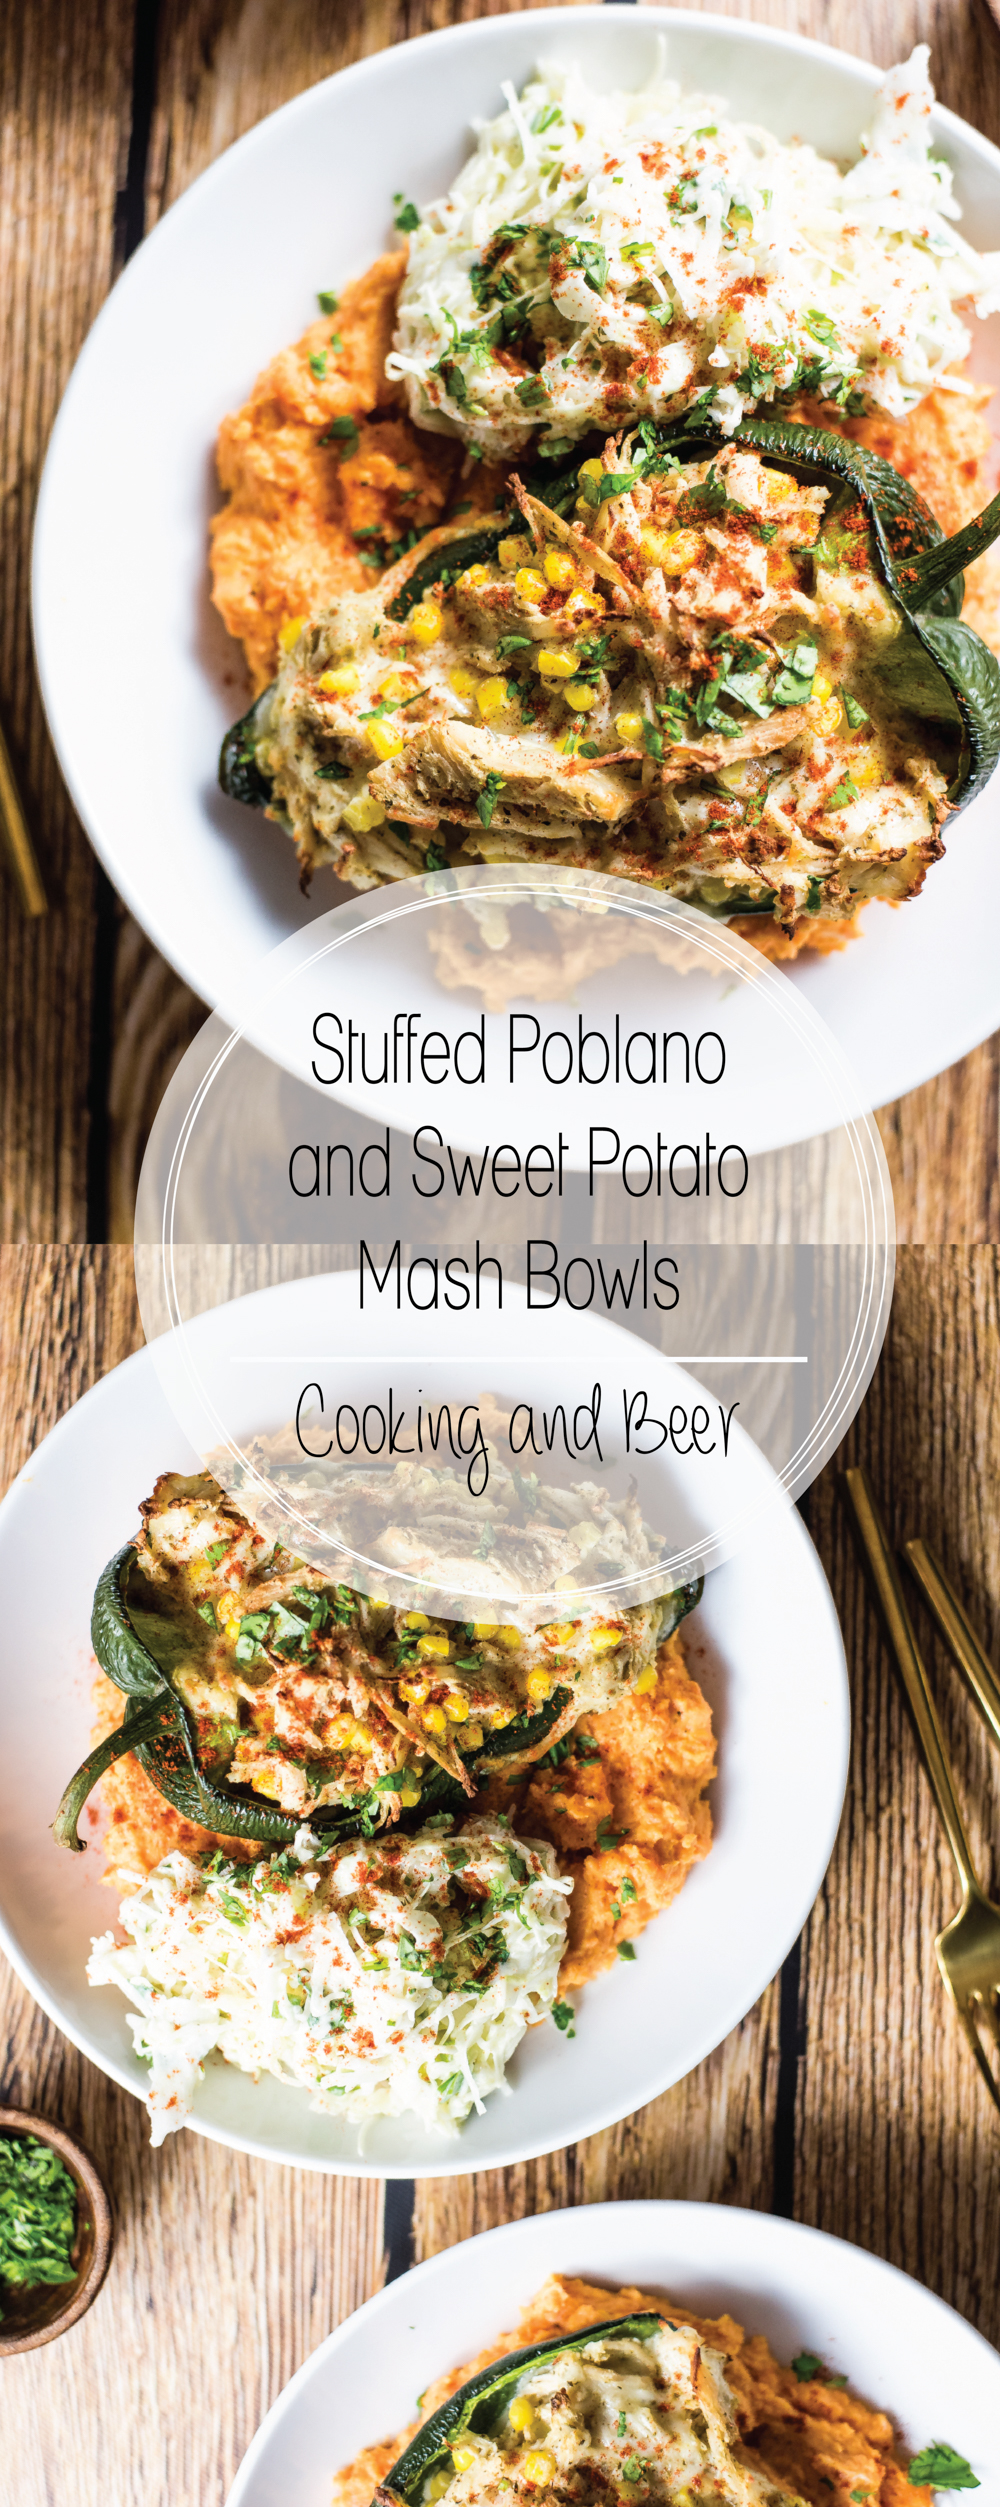 Stuffed poblano and sweet potato mash bowls are the perfect weeknight healthy recipe. It's packed full of flavor that will have you wanting more!